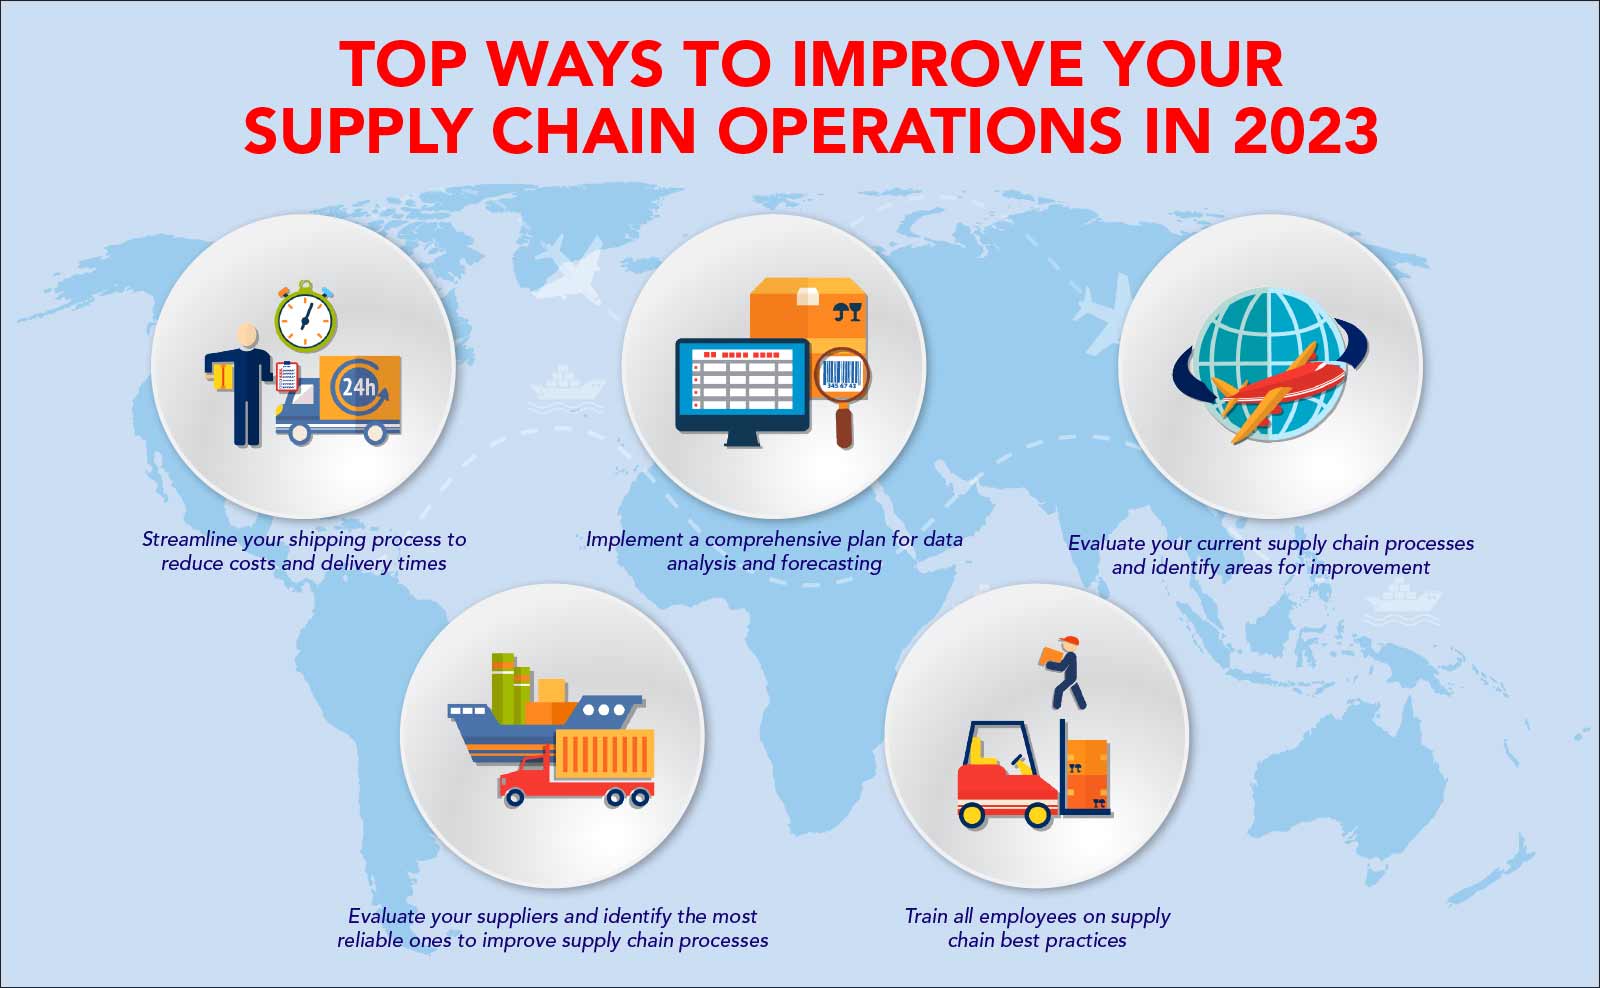 Top Ways to Improve Your Supply Chain Operations